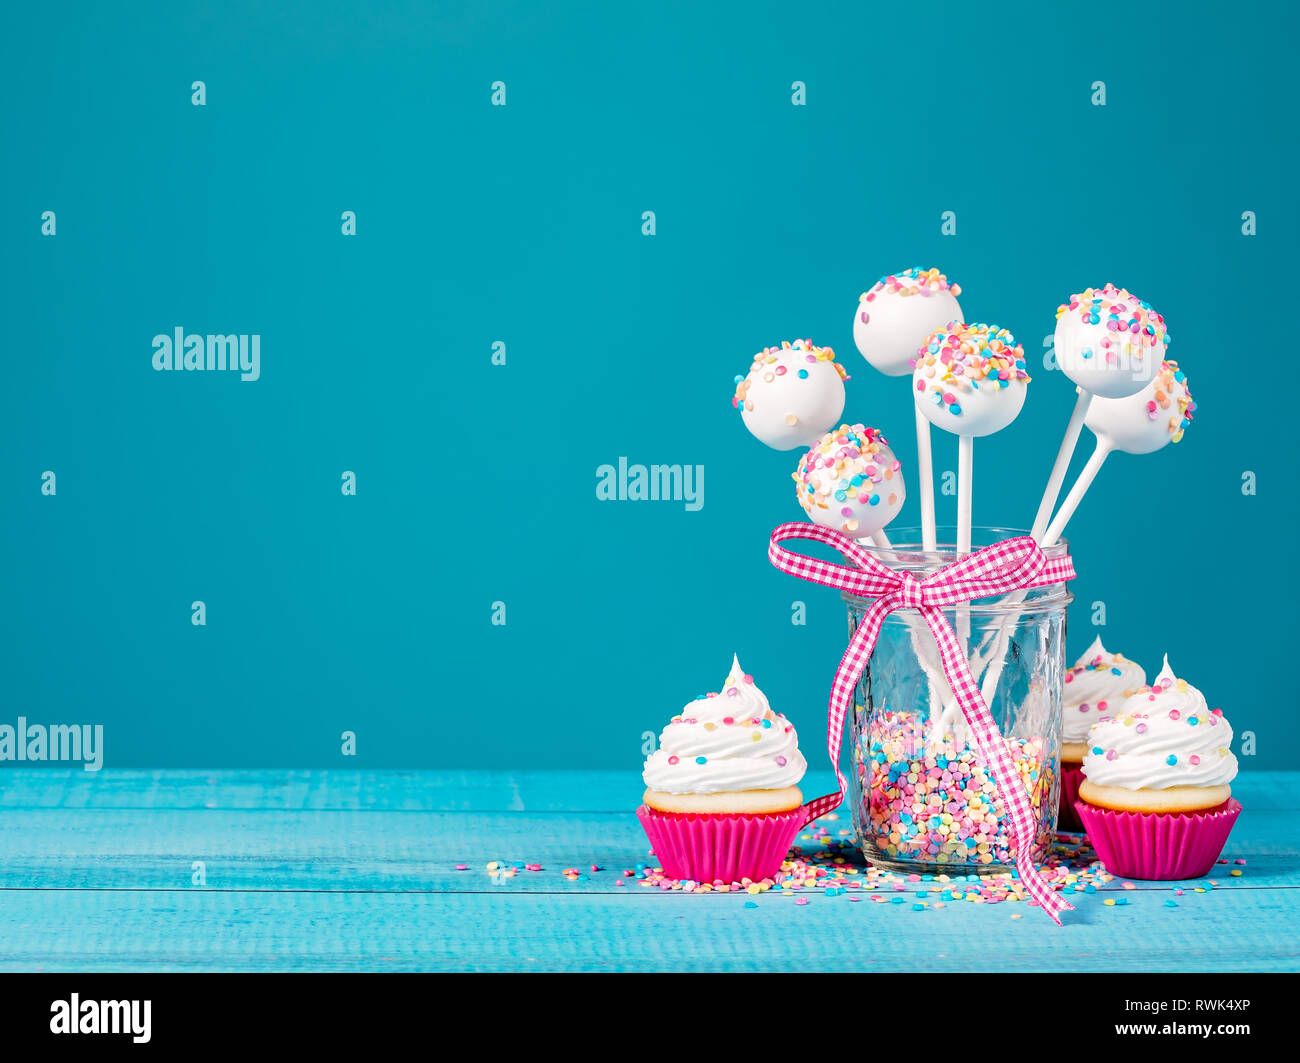 Vanilla cake pops with colorful sprinkles and cupcakes on a blue background. Stock Photo